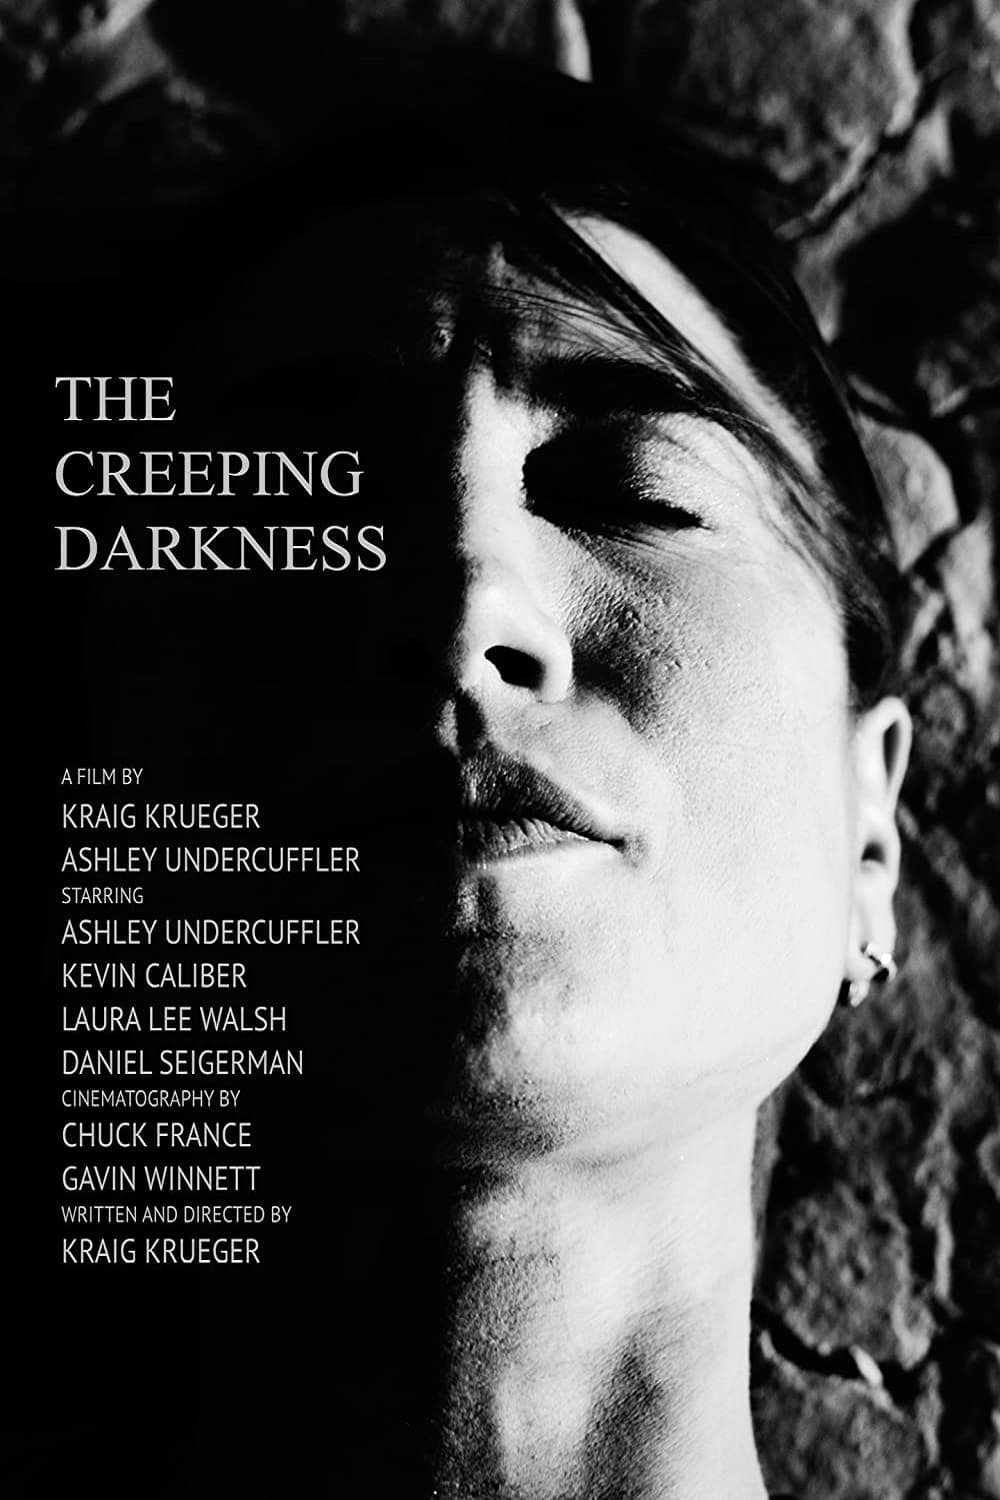 The Creeping Darkness